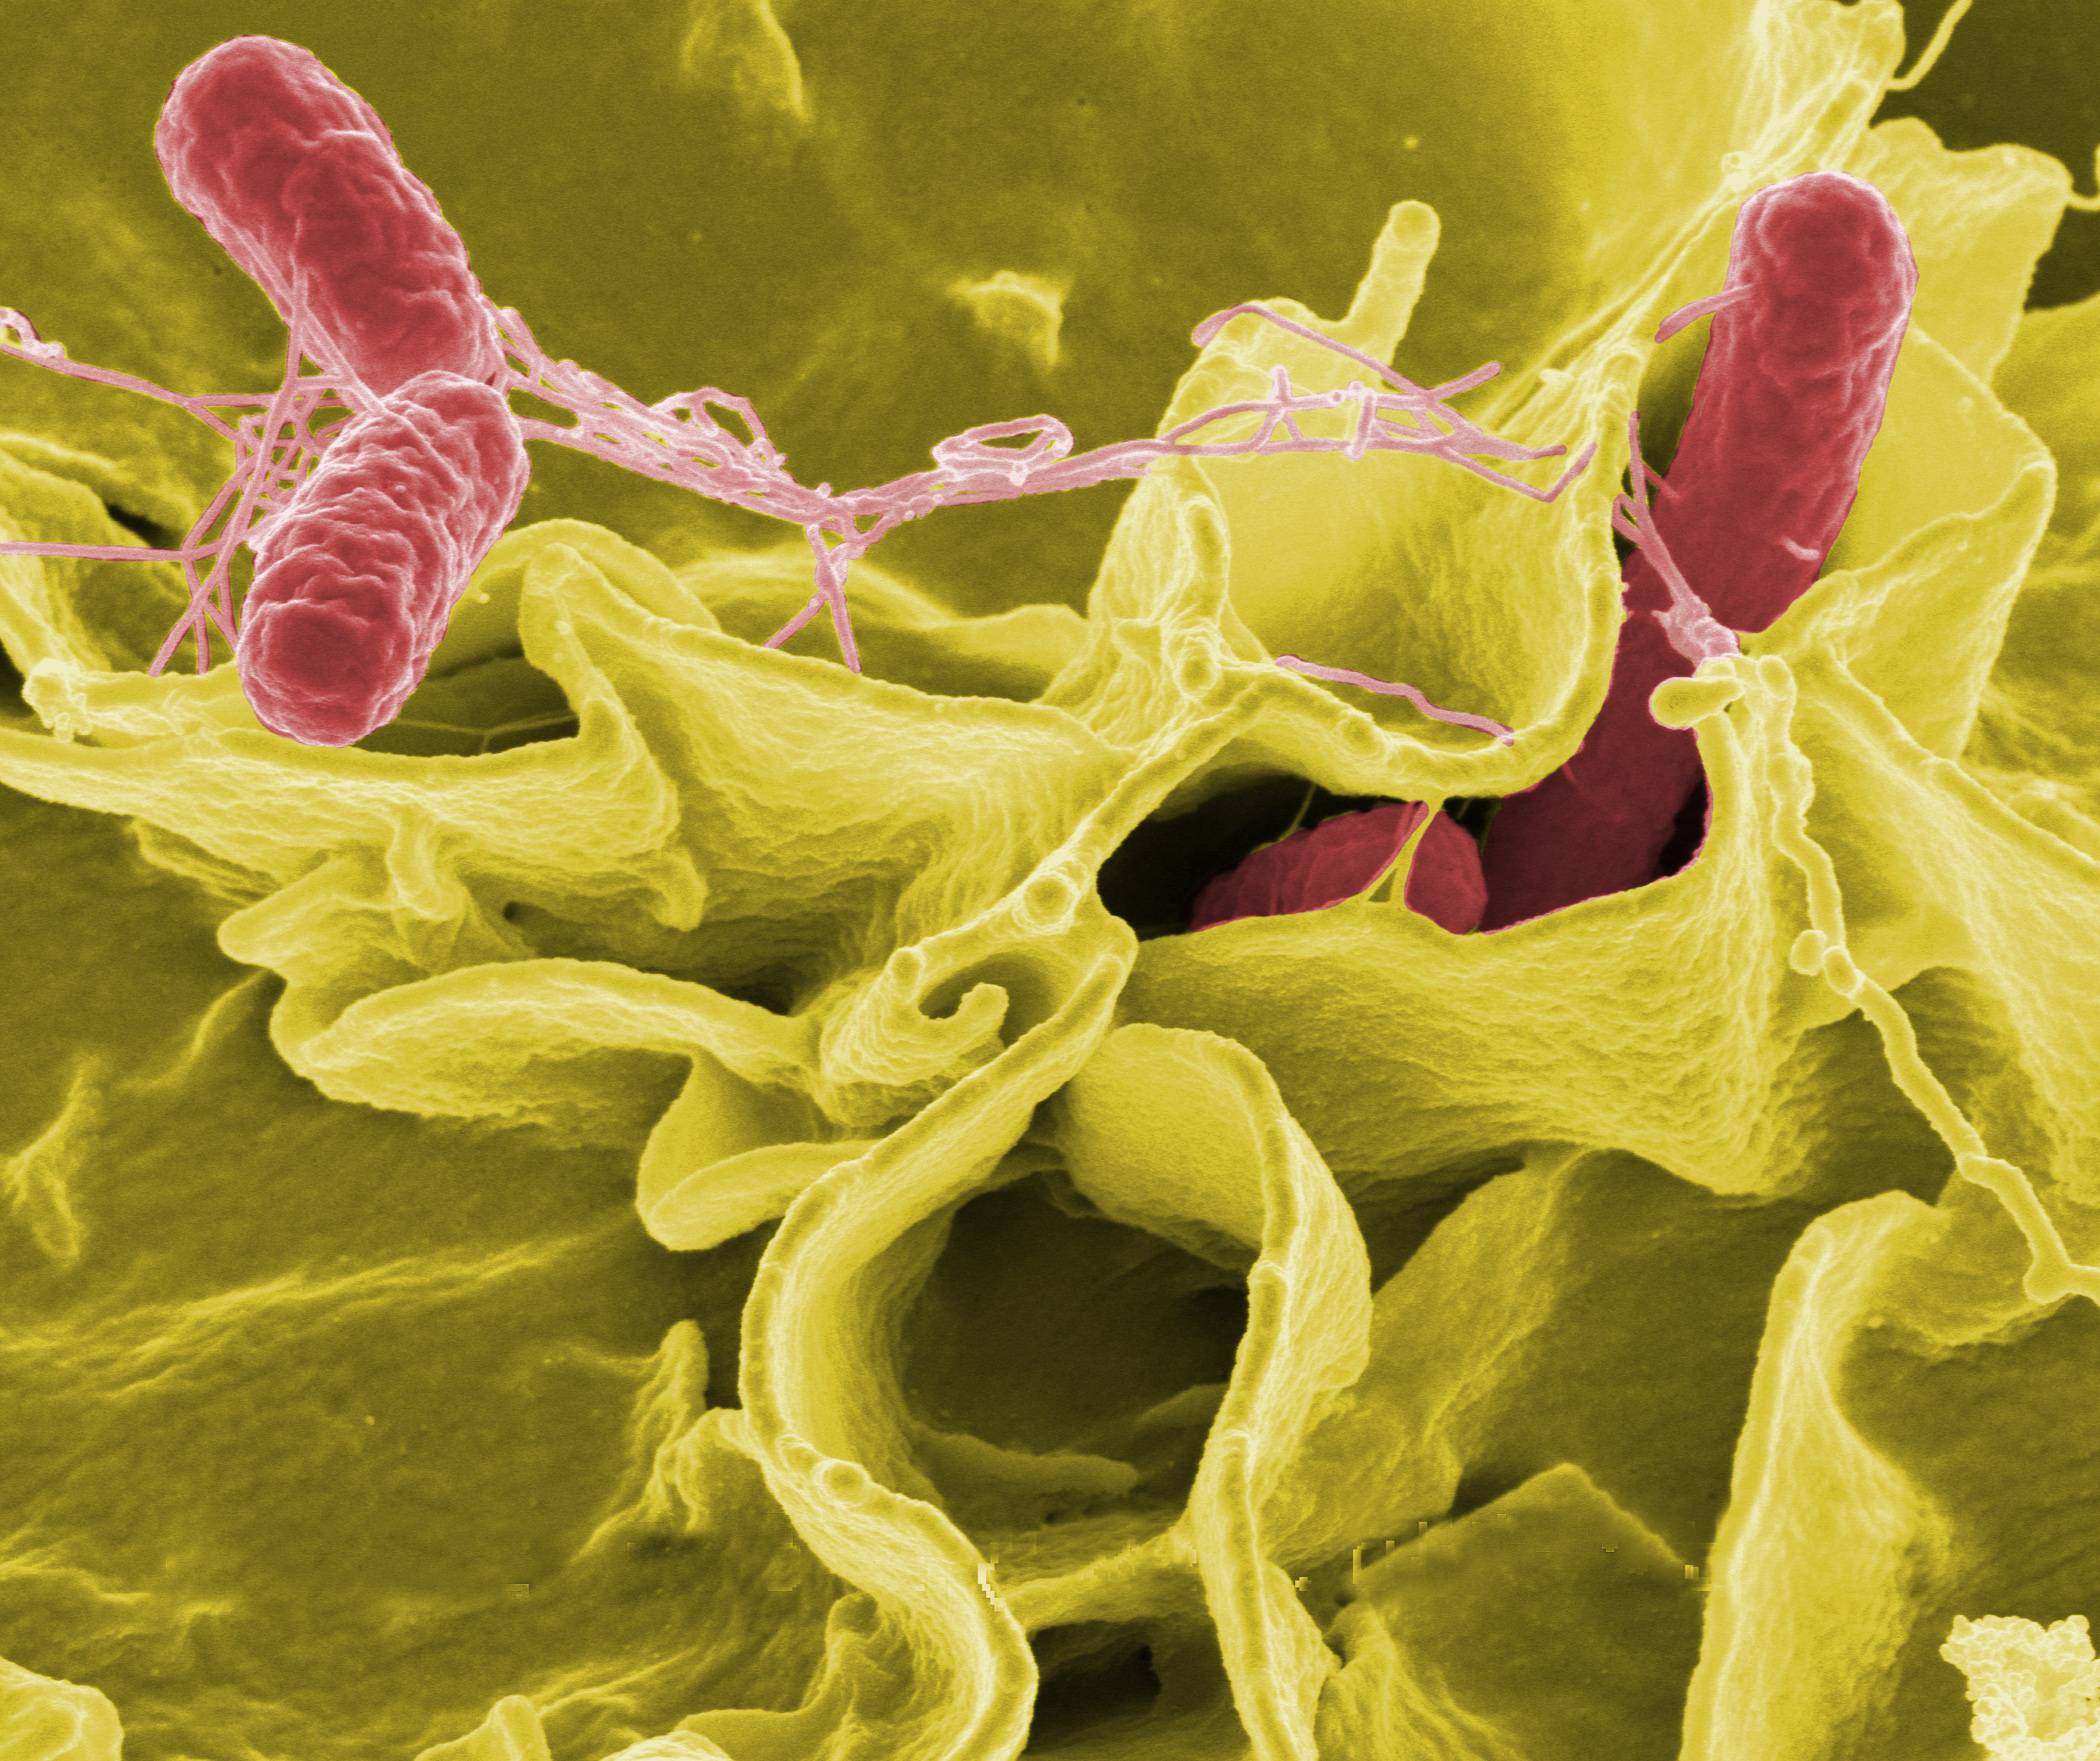 Warmer Temperatures Could Mean More Salmonella Outbreaks | Popular ...